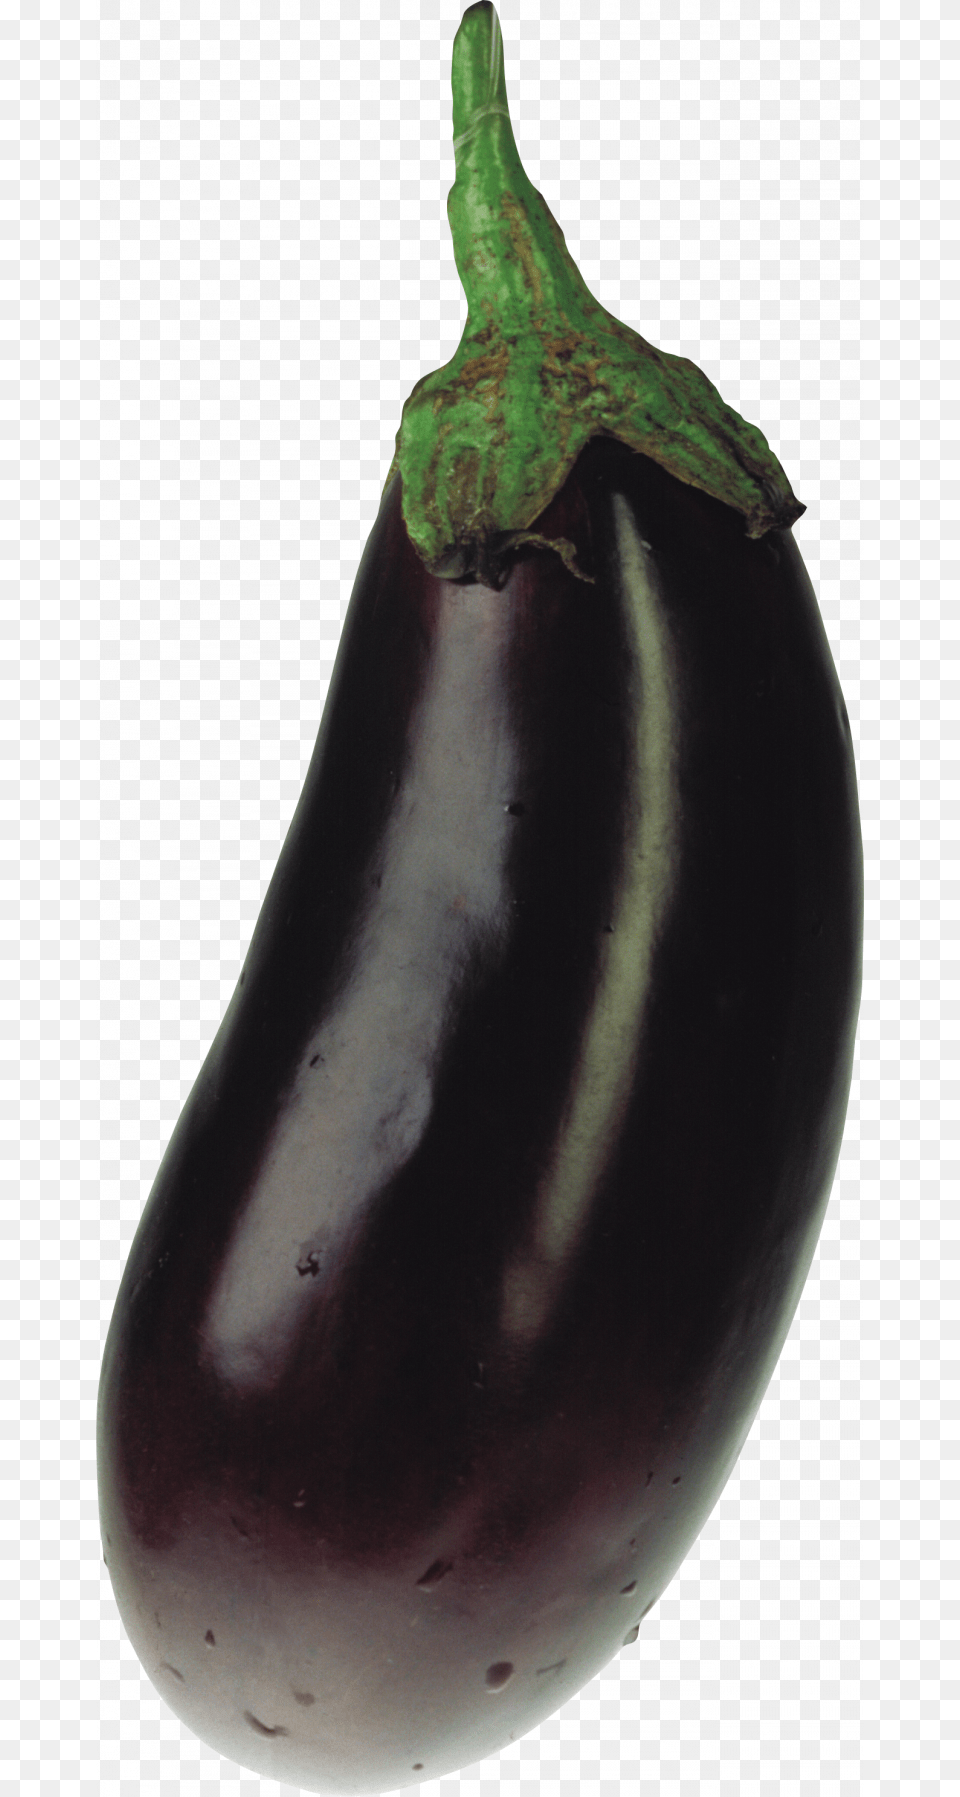 Eggplant With No Background, Food, Produce, Plant, Vegetable Free Png